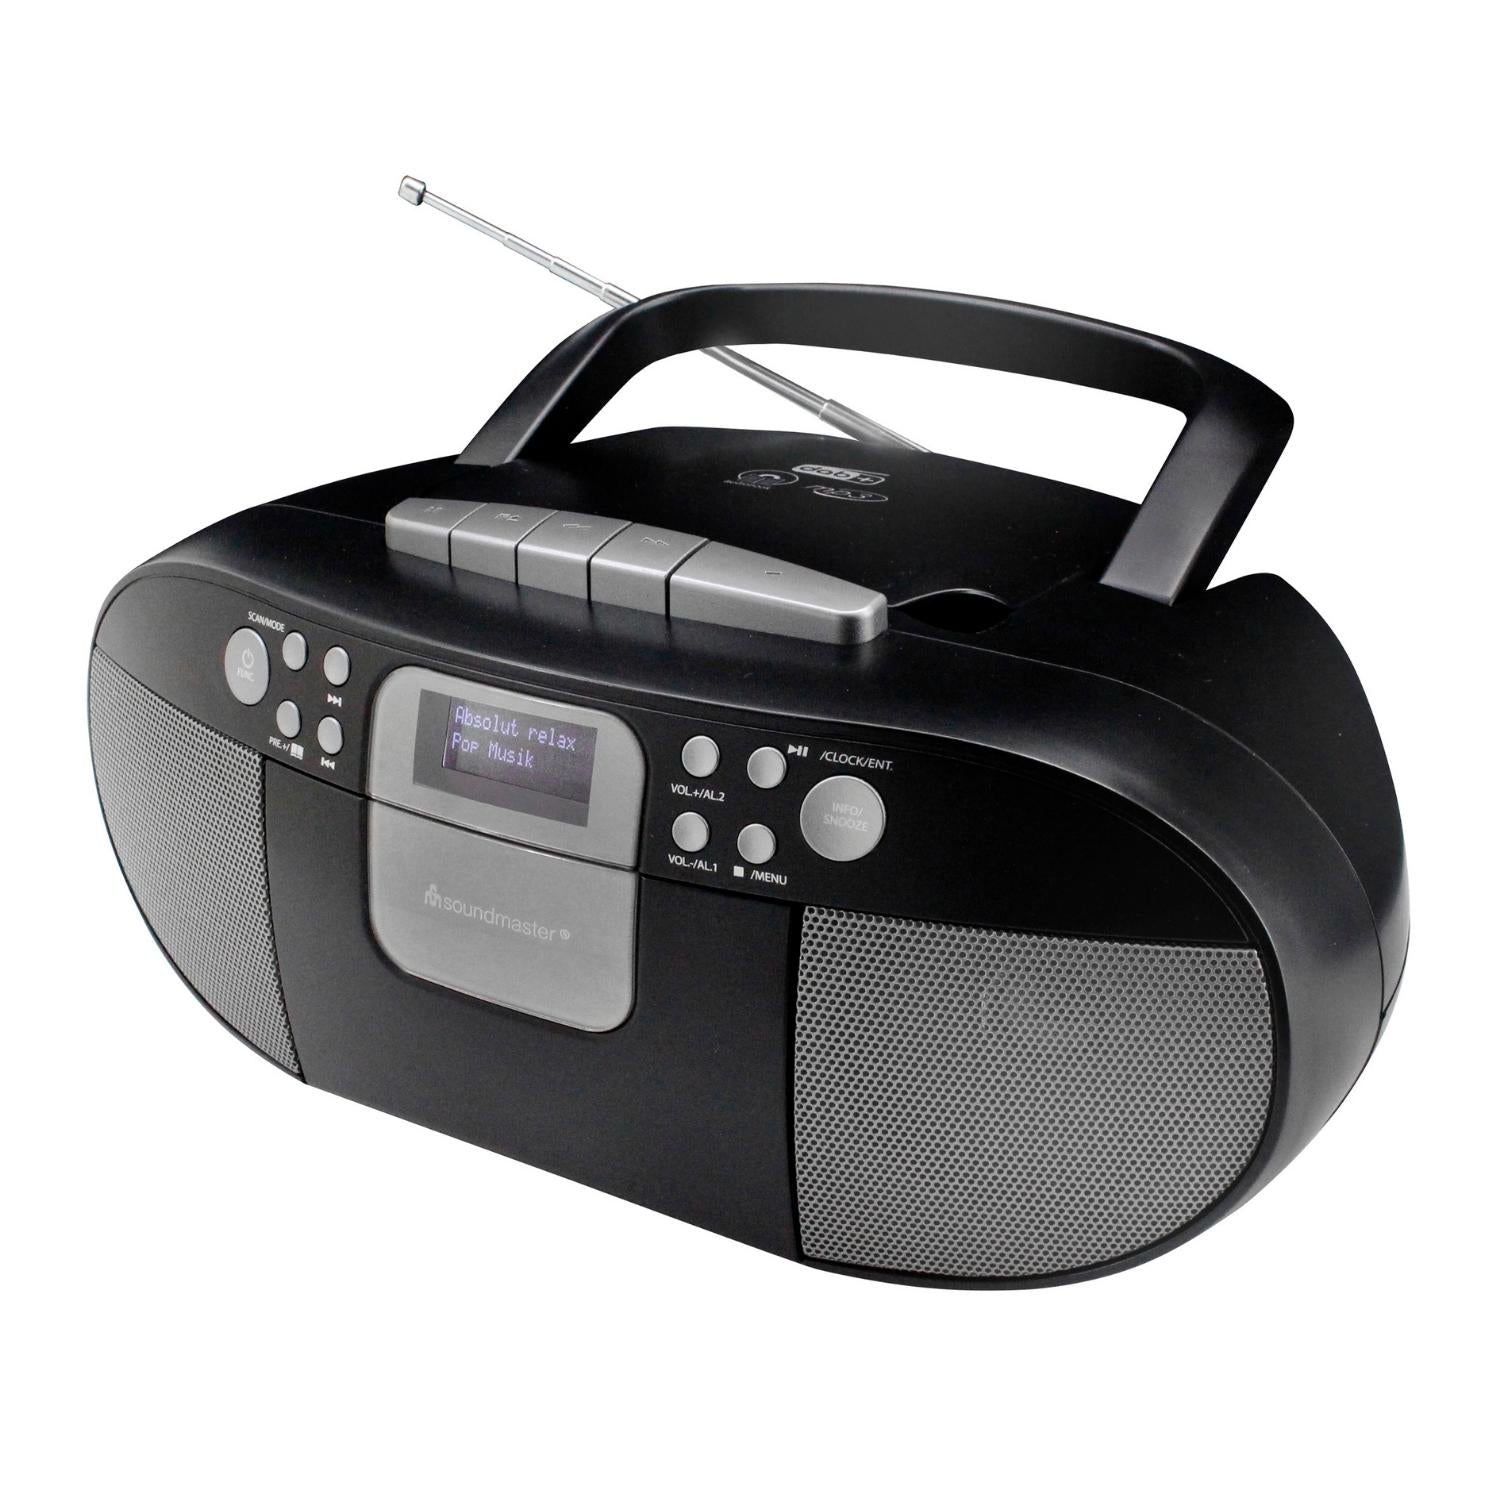 Soundmaster SCD7800SW Boombox DAB+ CD MP3 cassette recorder with USB alarm clock function, audio book function